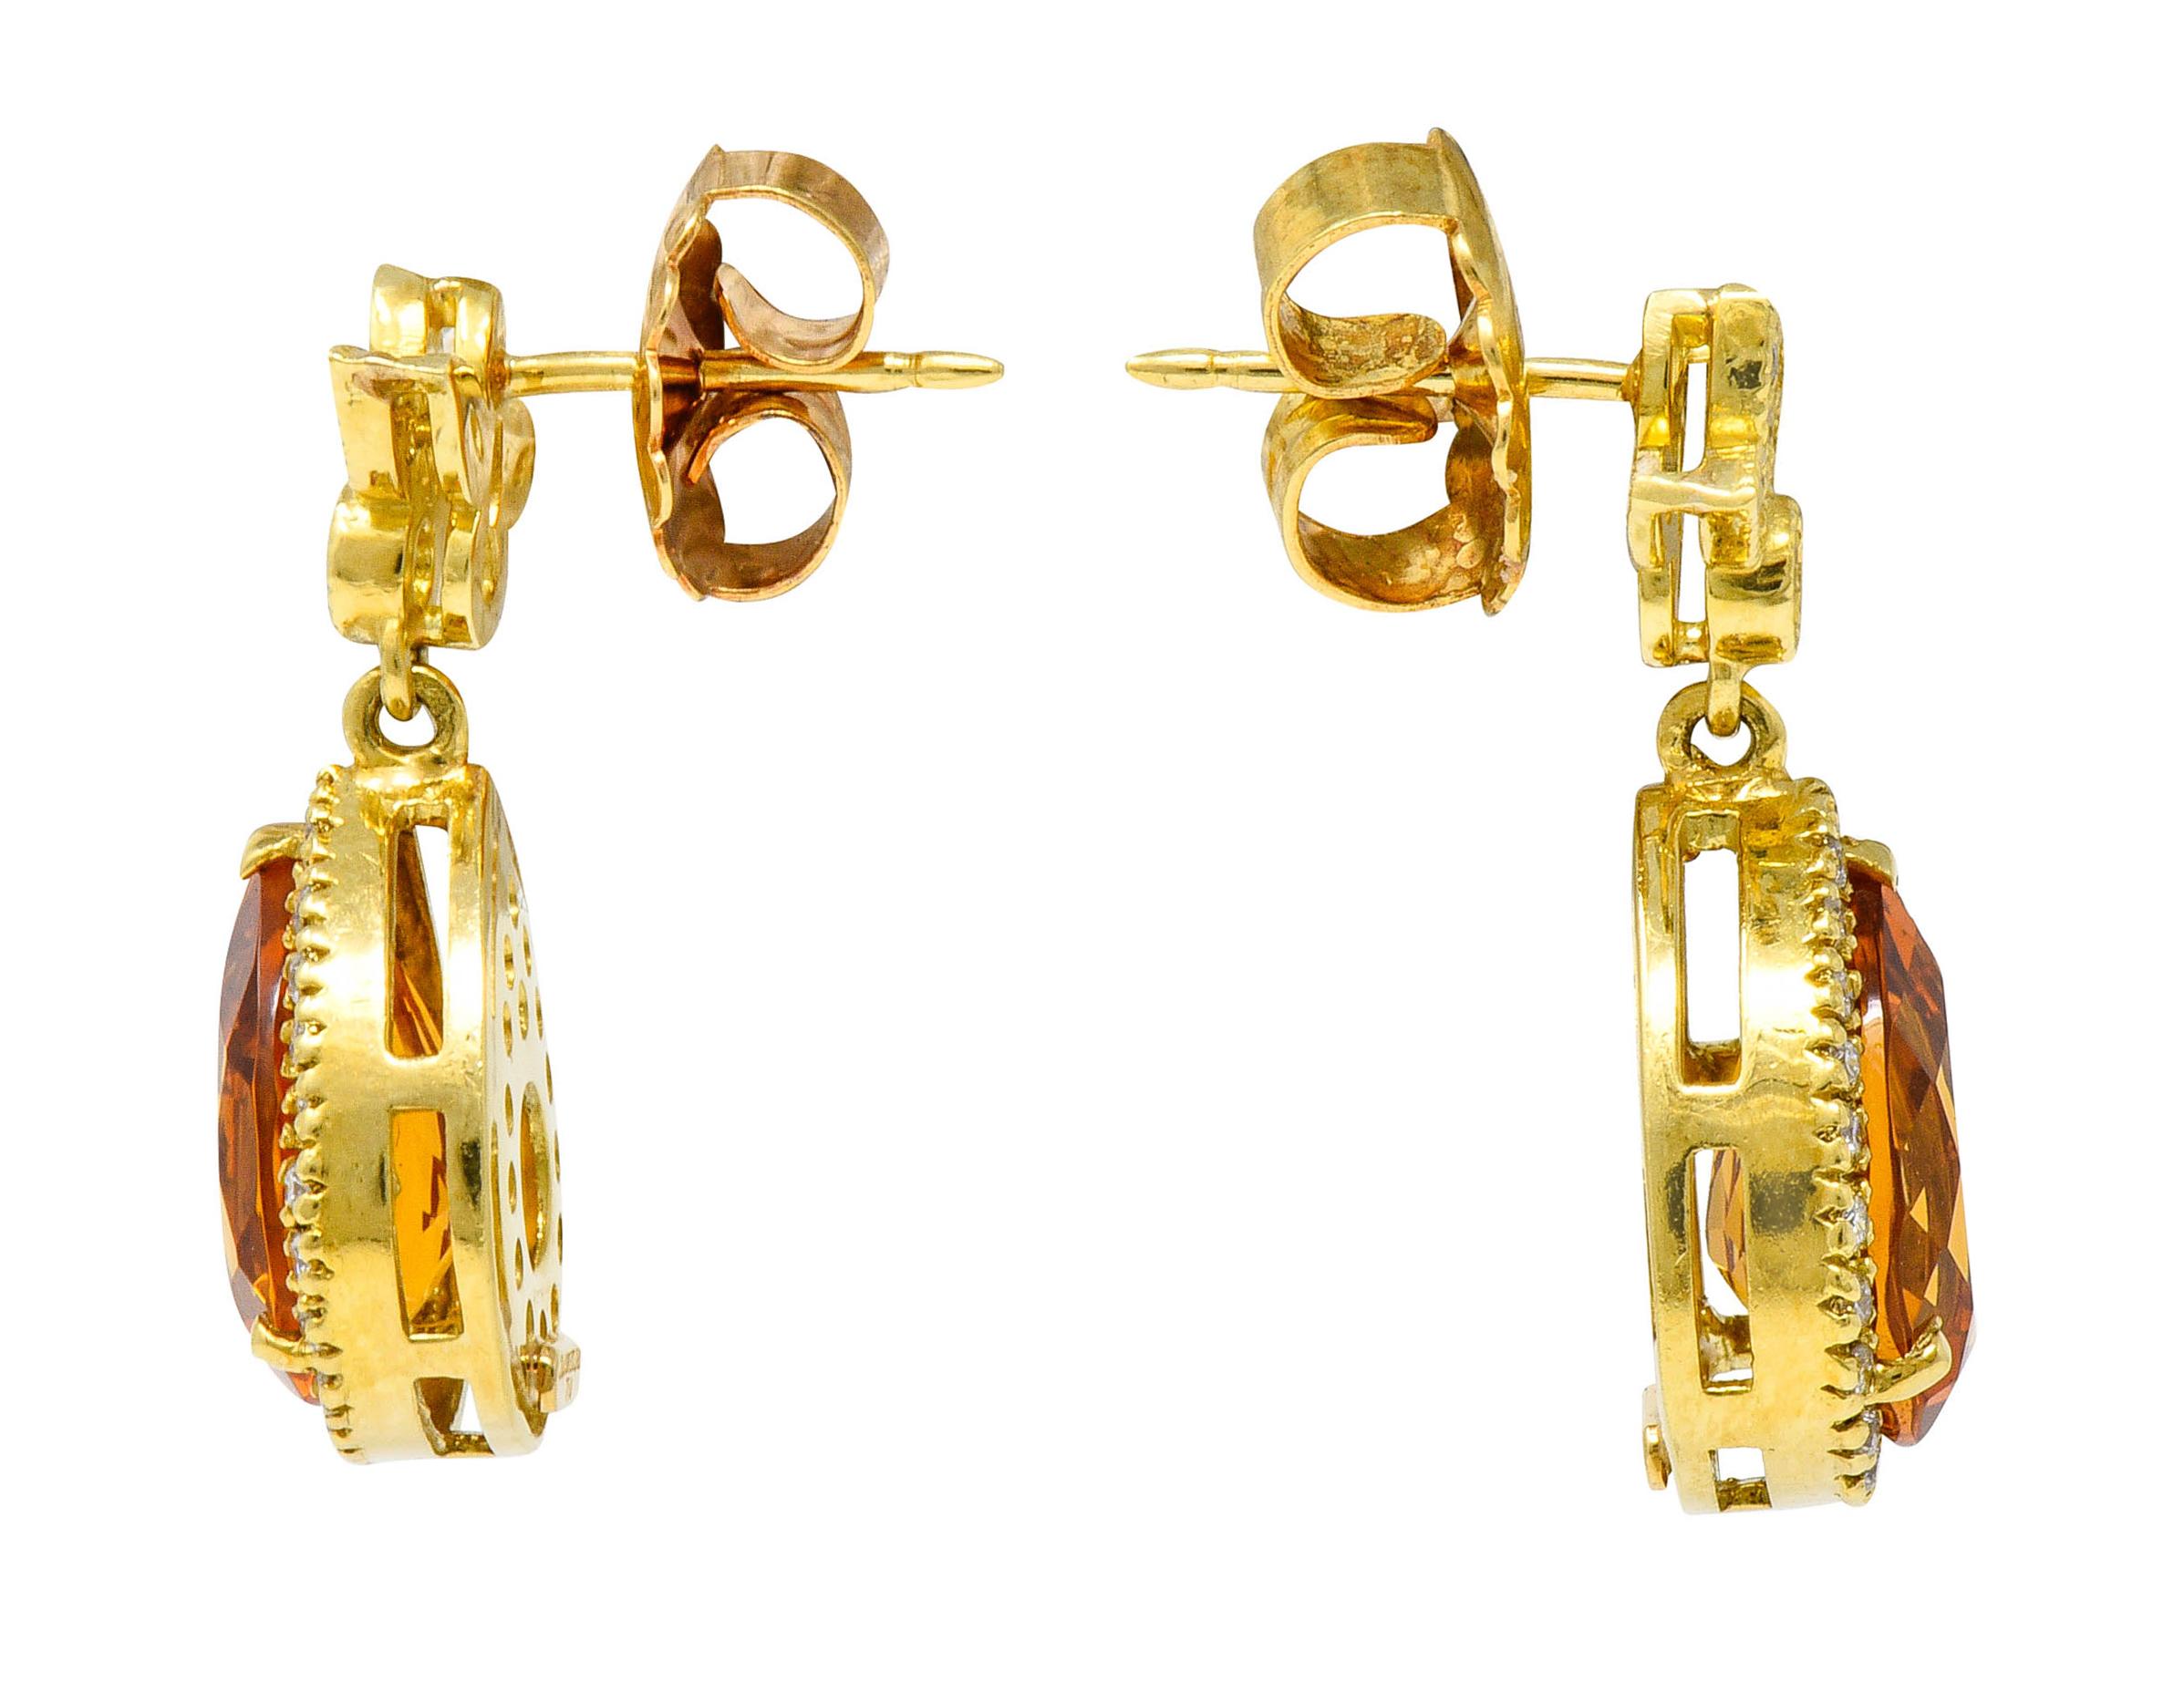 Earrings are designed with a stylized foliate surmount accented by milgrain and diamonds

Suspending an articulated drop centering a pear cut citrine measuring approximately 12.0 x 9.0 mm

Medium-dark orange in color and surrounded by a halo of